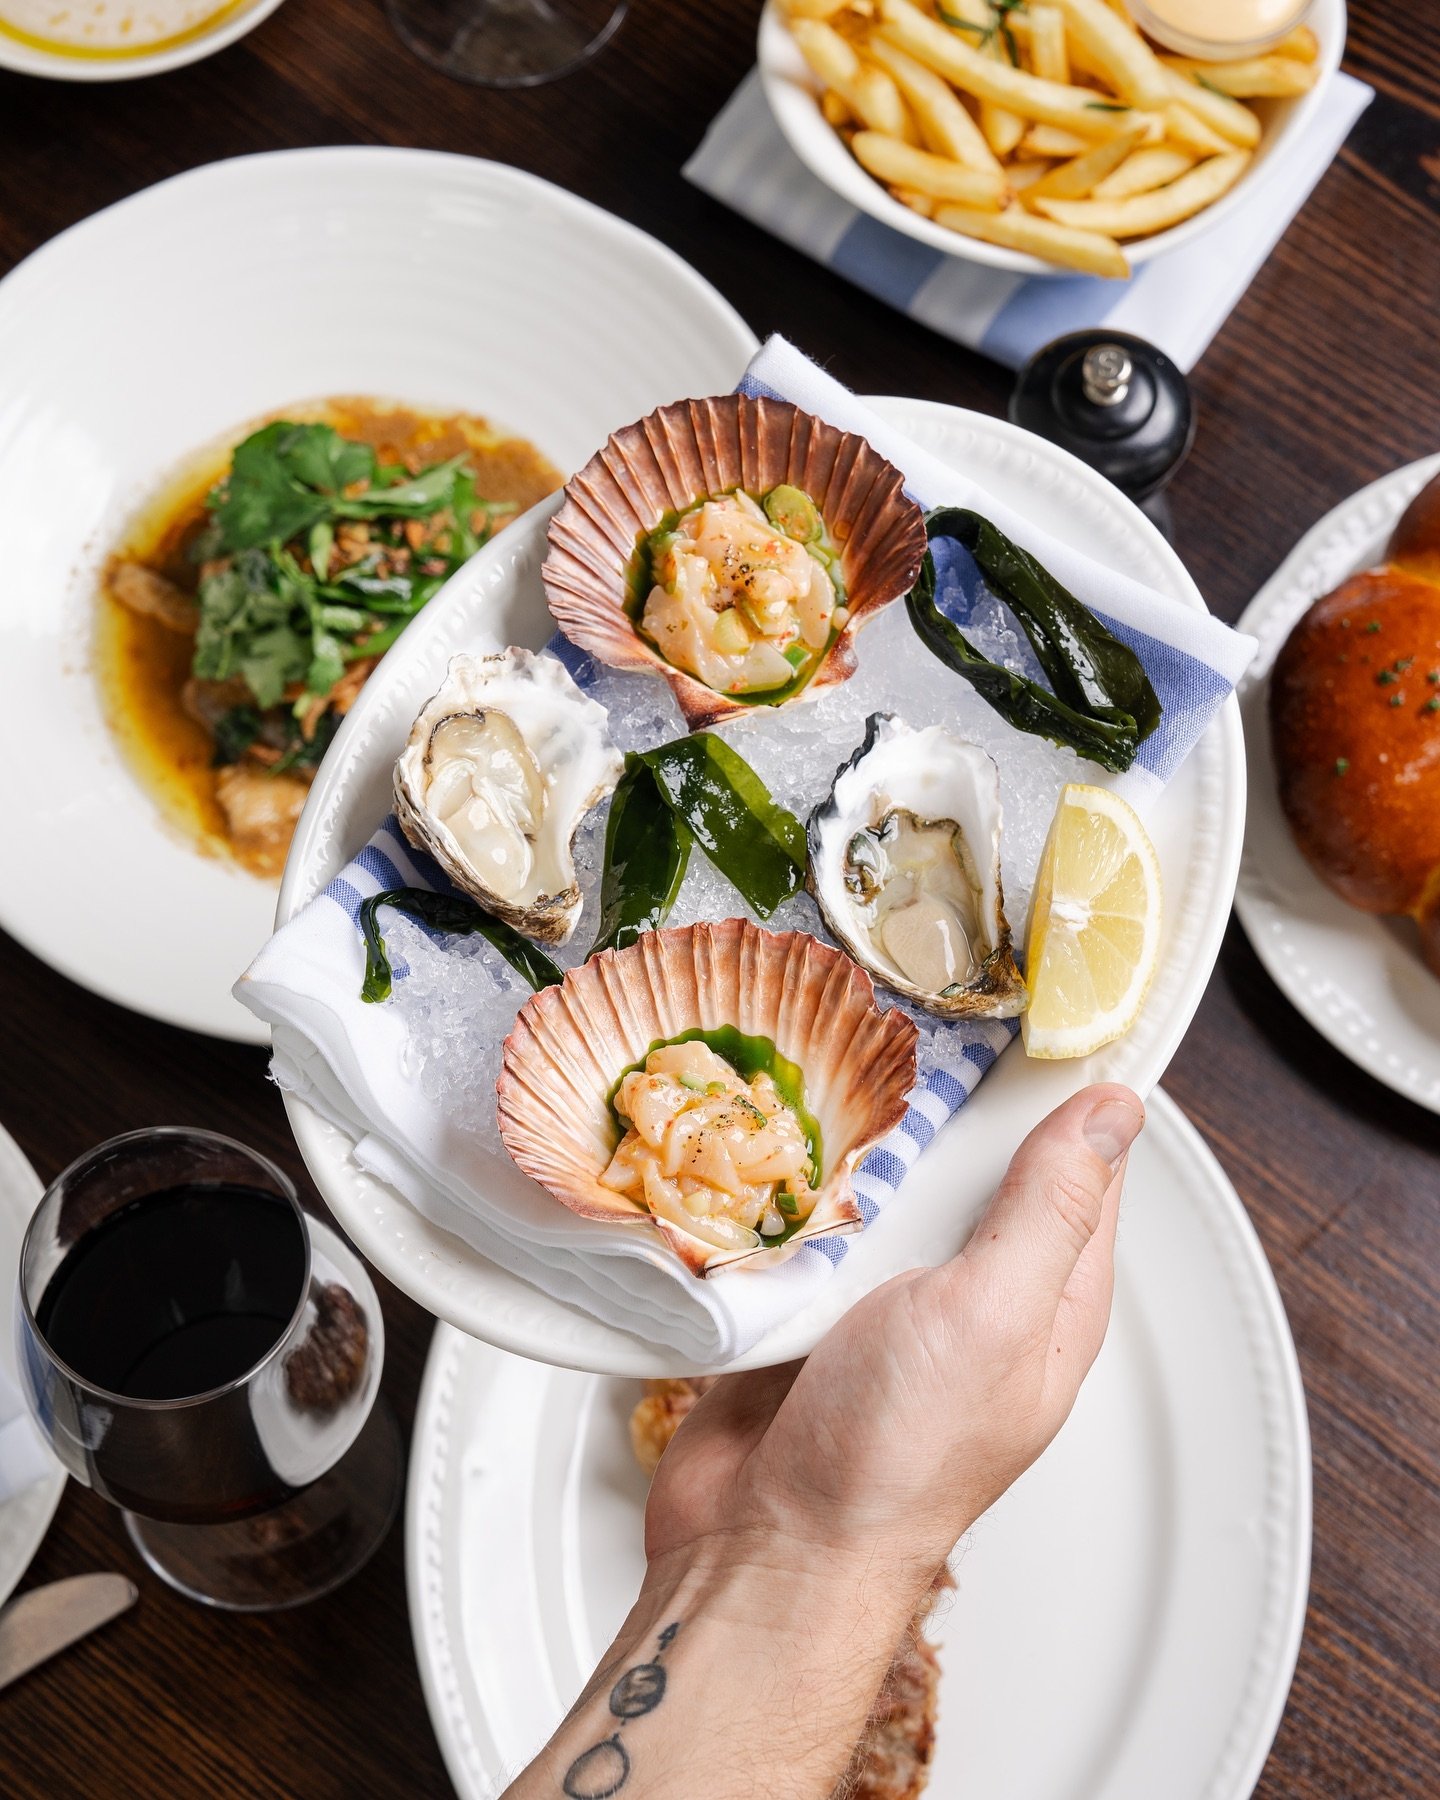 Join us for our $50 Hooked Banquet 🎣

For just $50 per person, immerse yourself in a feast featuring whipped taramasalata, fresh oysters, scallops, fish curry, sirloin steak, and more. Explore the full menu at www.foshportside.com.au/hooked-banquet
